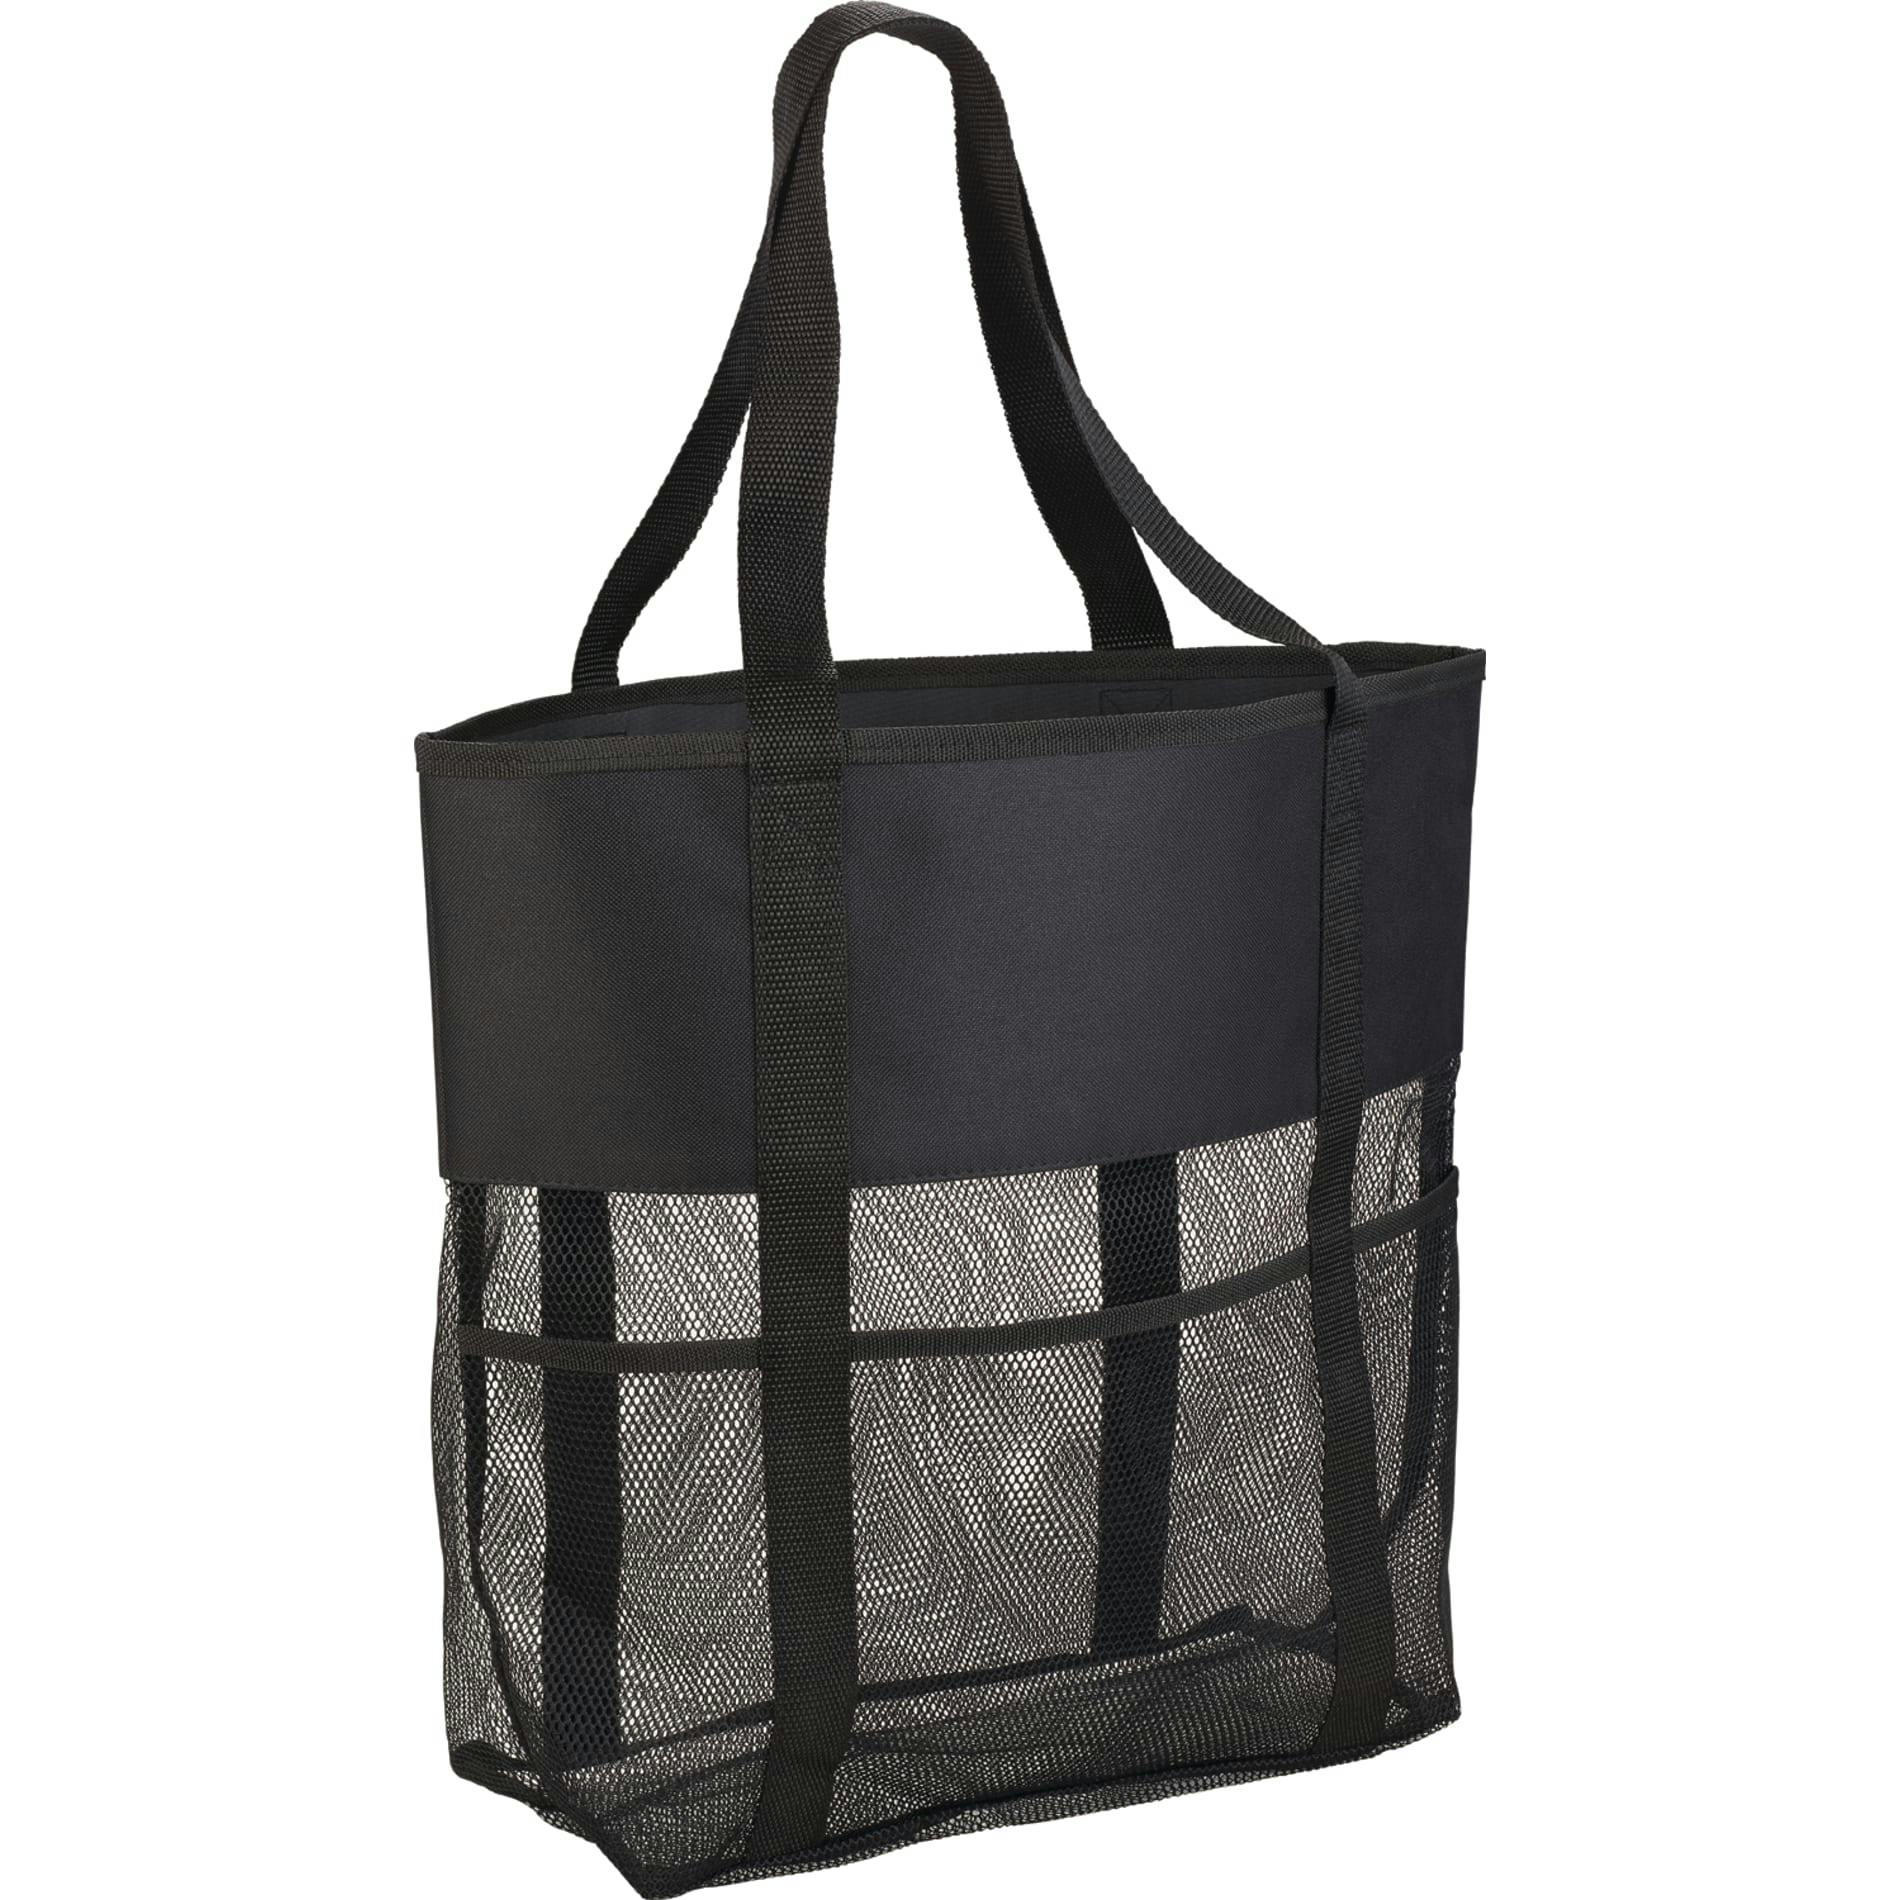 Utility Beach Tote - additional Image 1